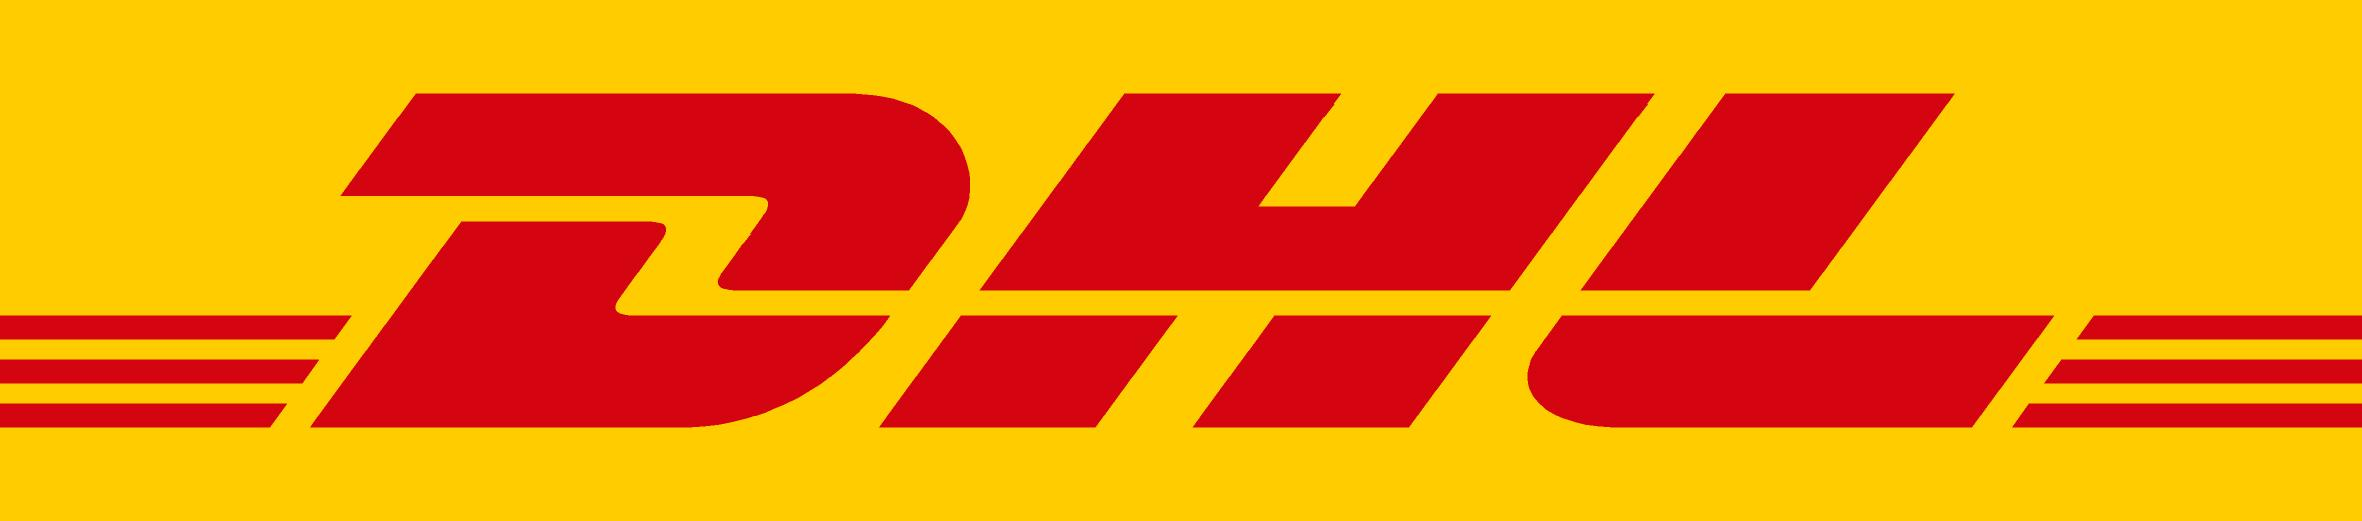 DHL Named Africa’s Number One International Freight Forwarder